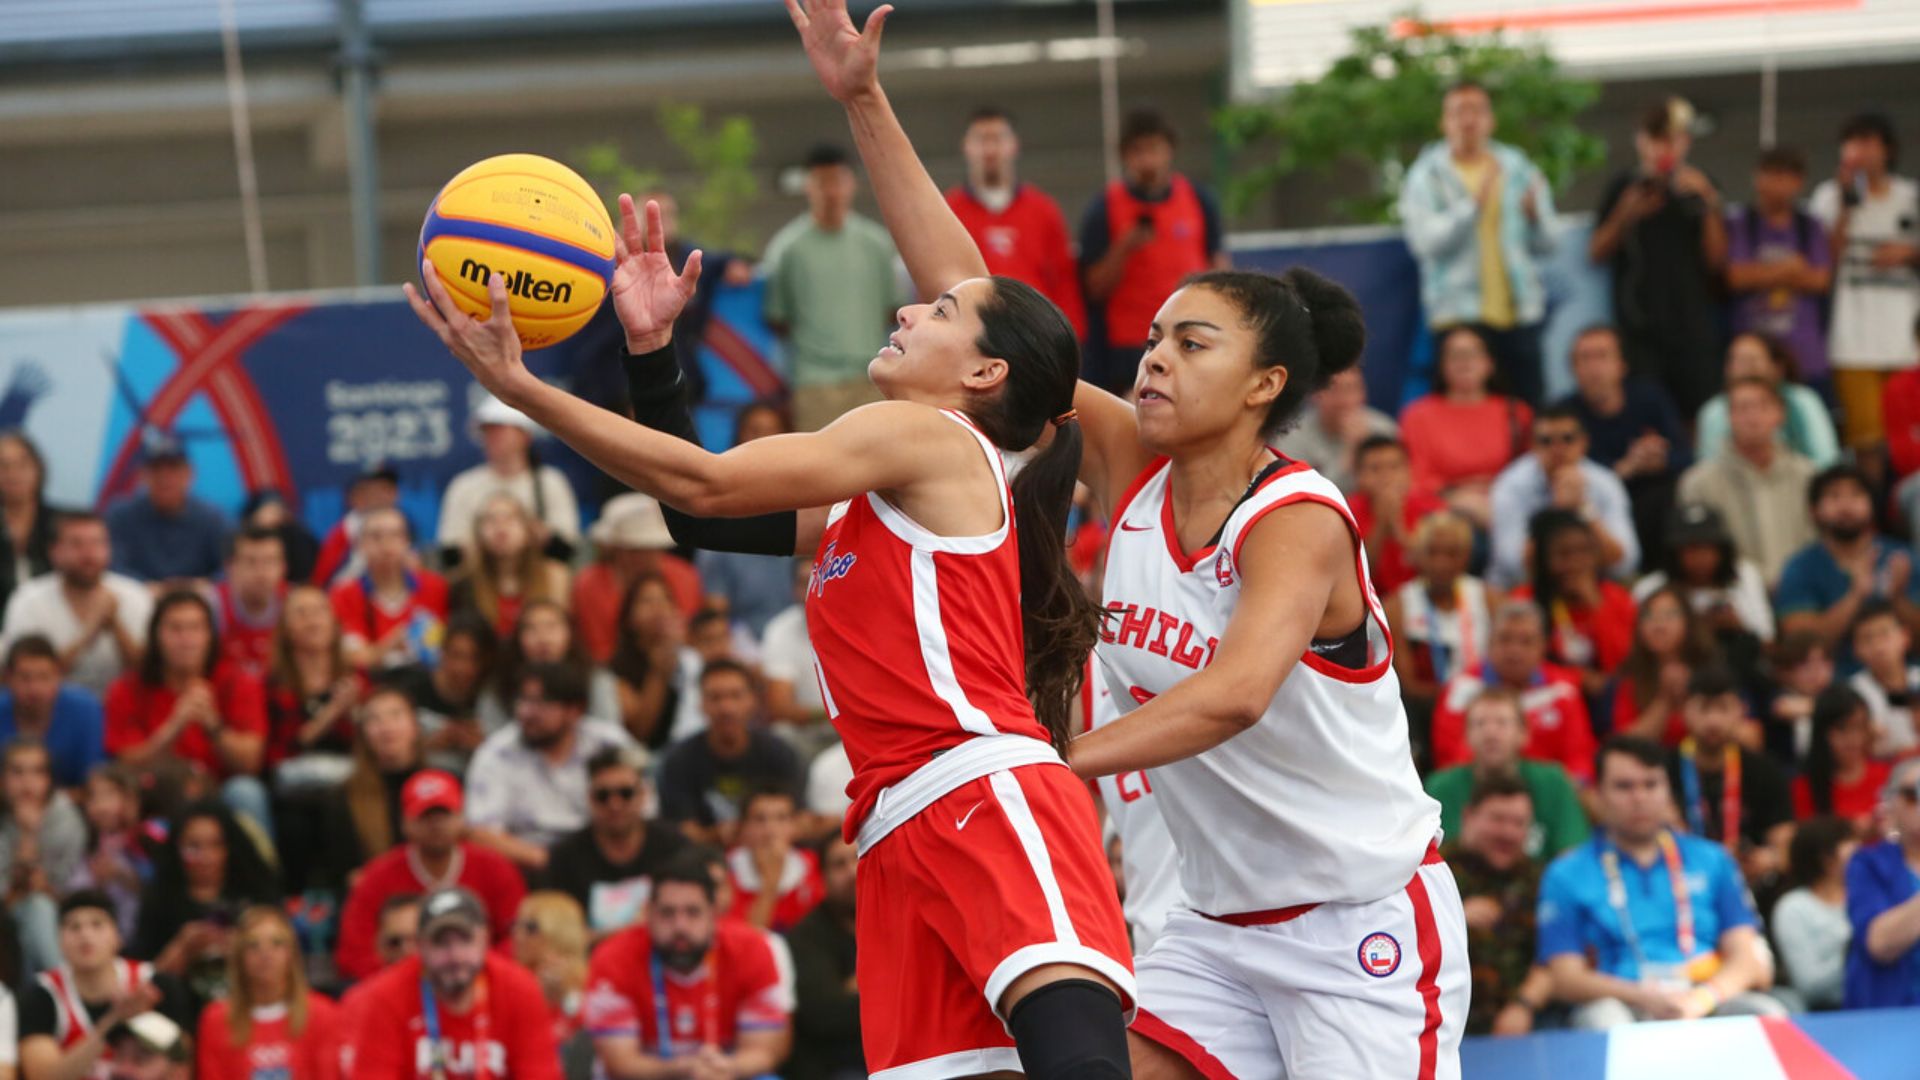 Chile secured bronze in women's 3x3 basketball